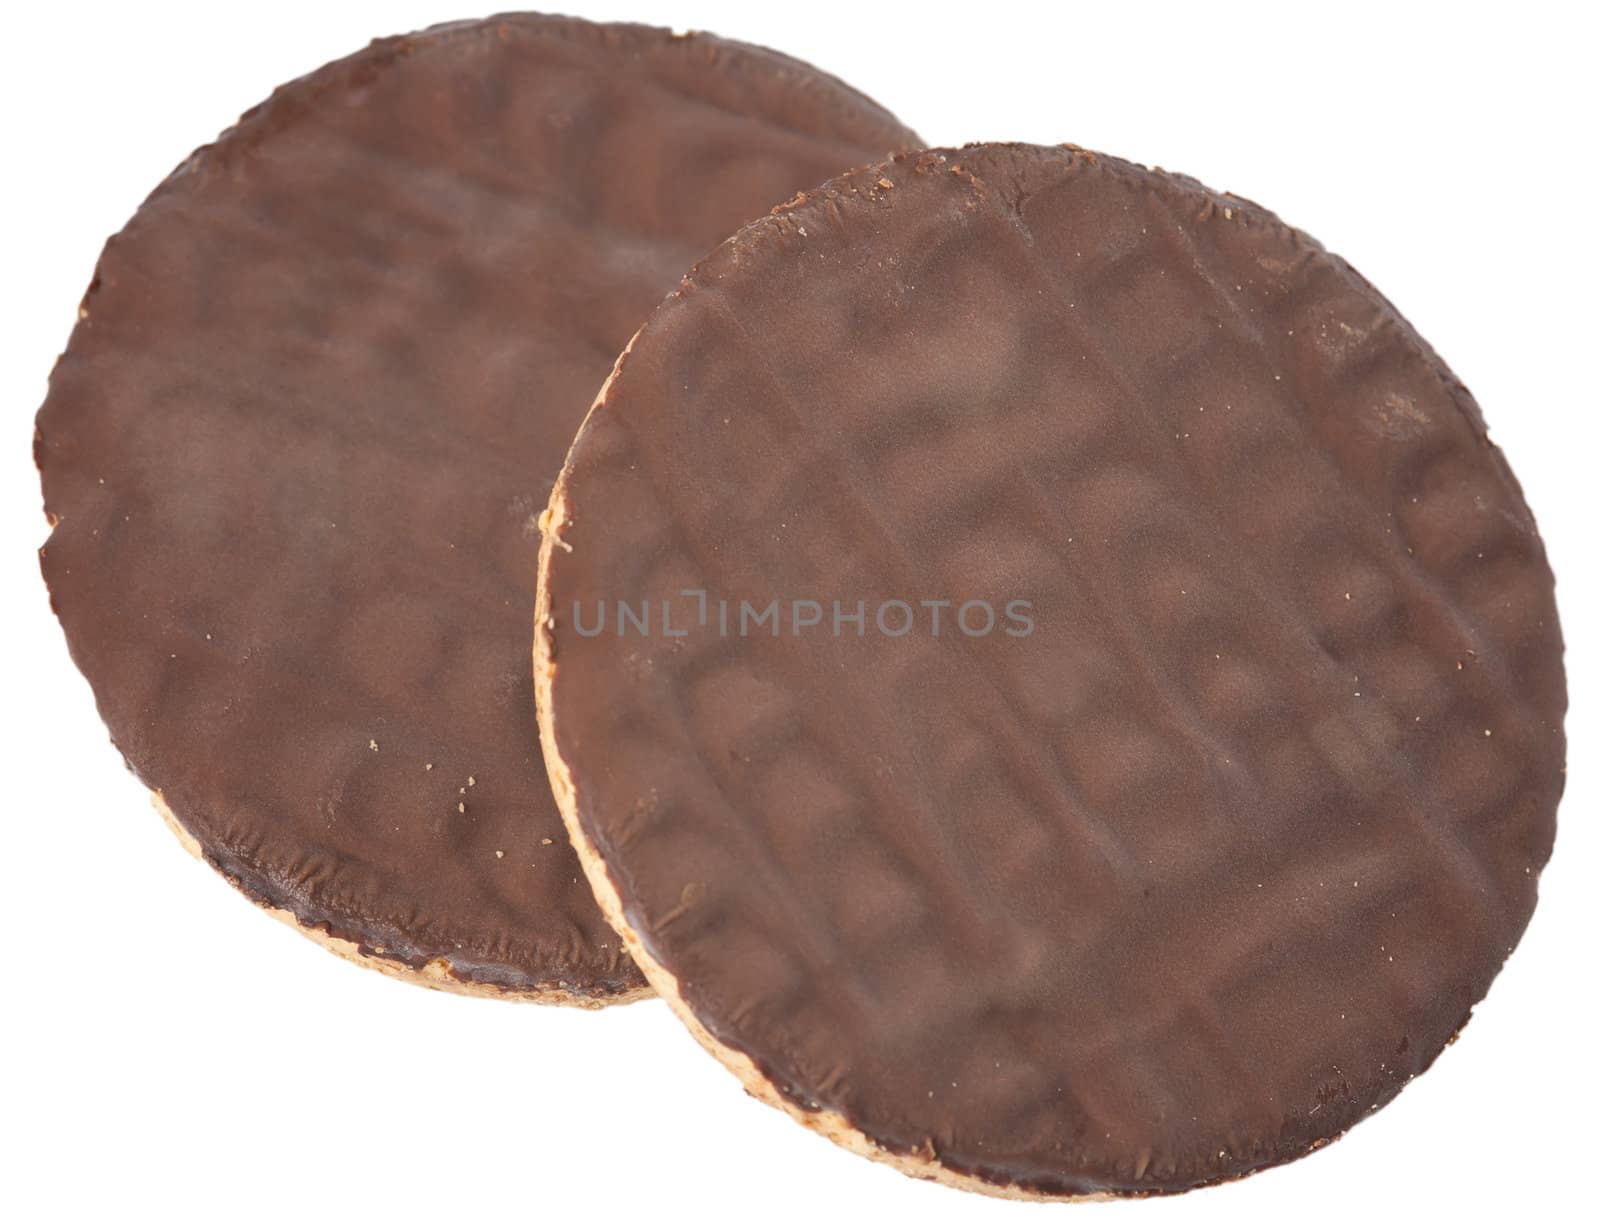 Two chocolate cookies on a white background